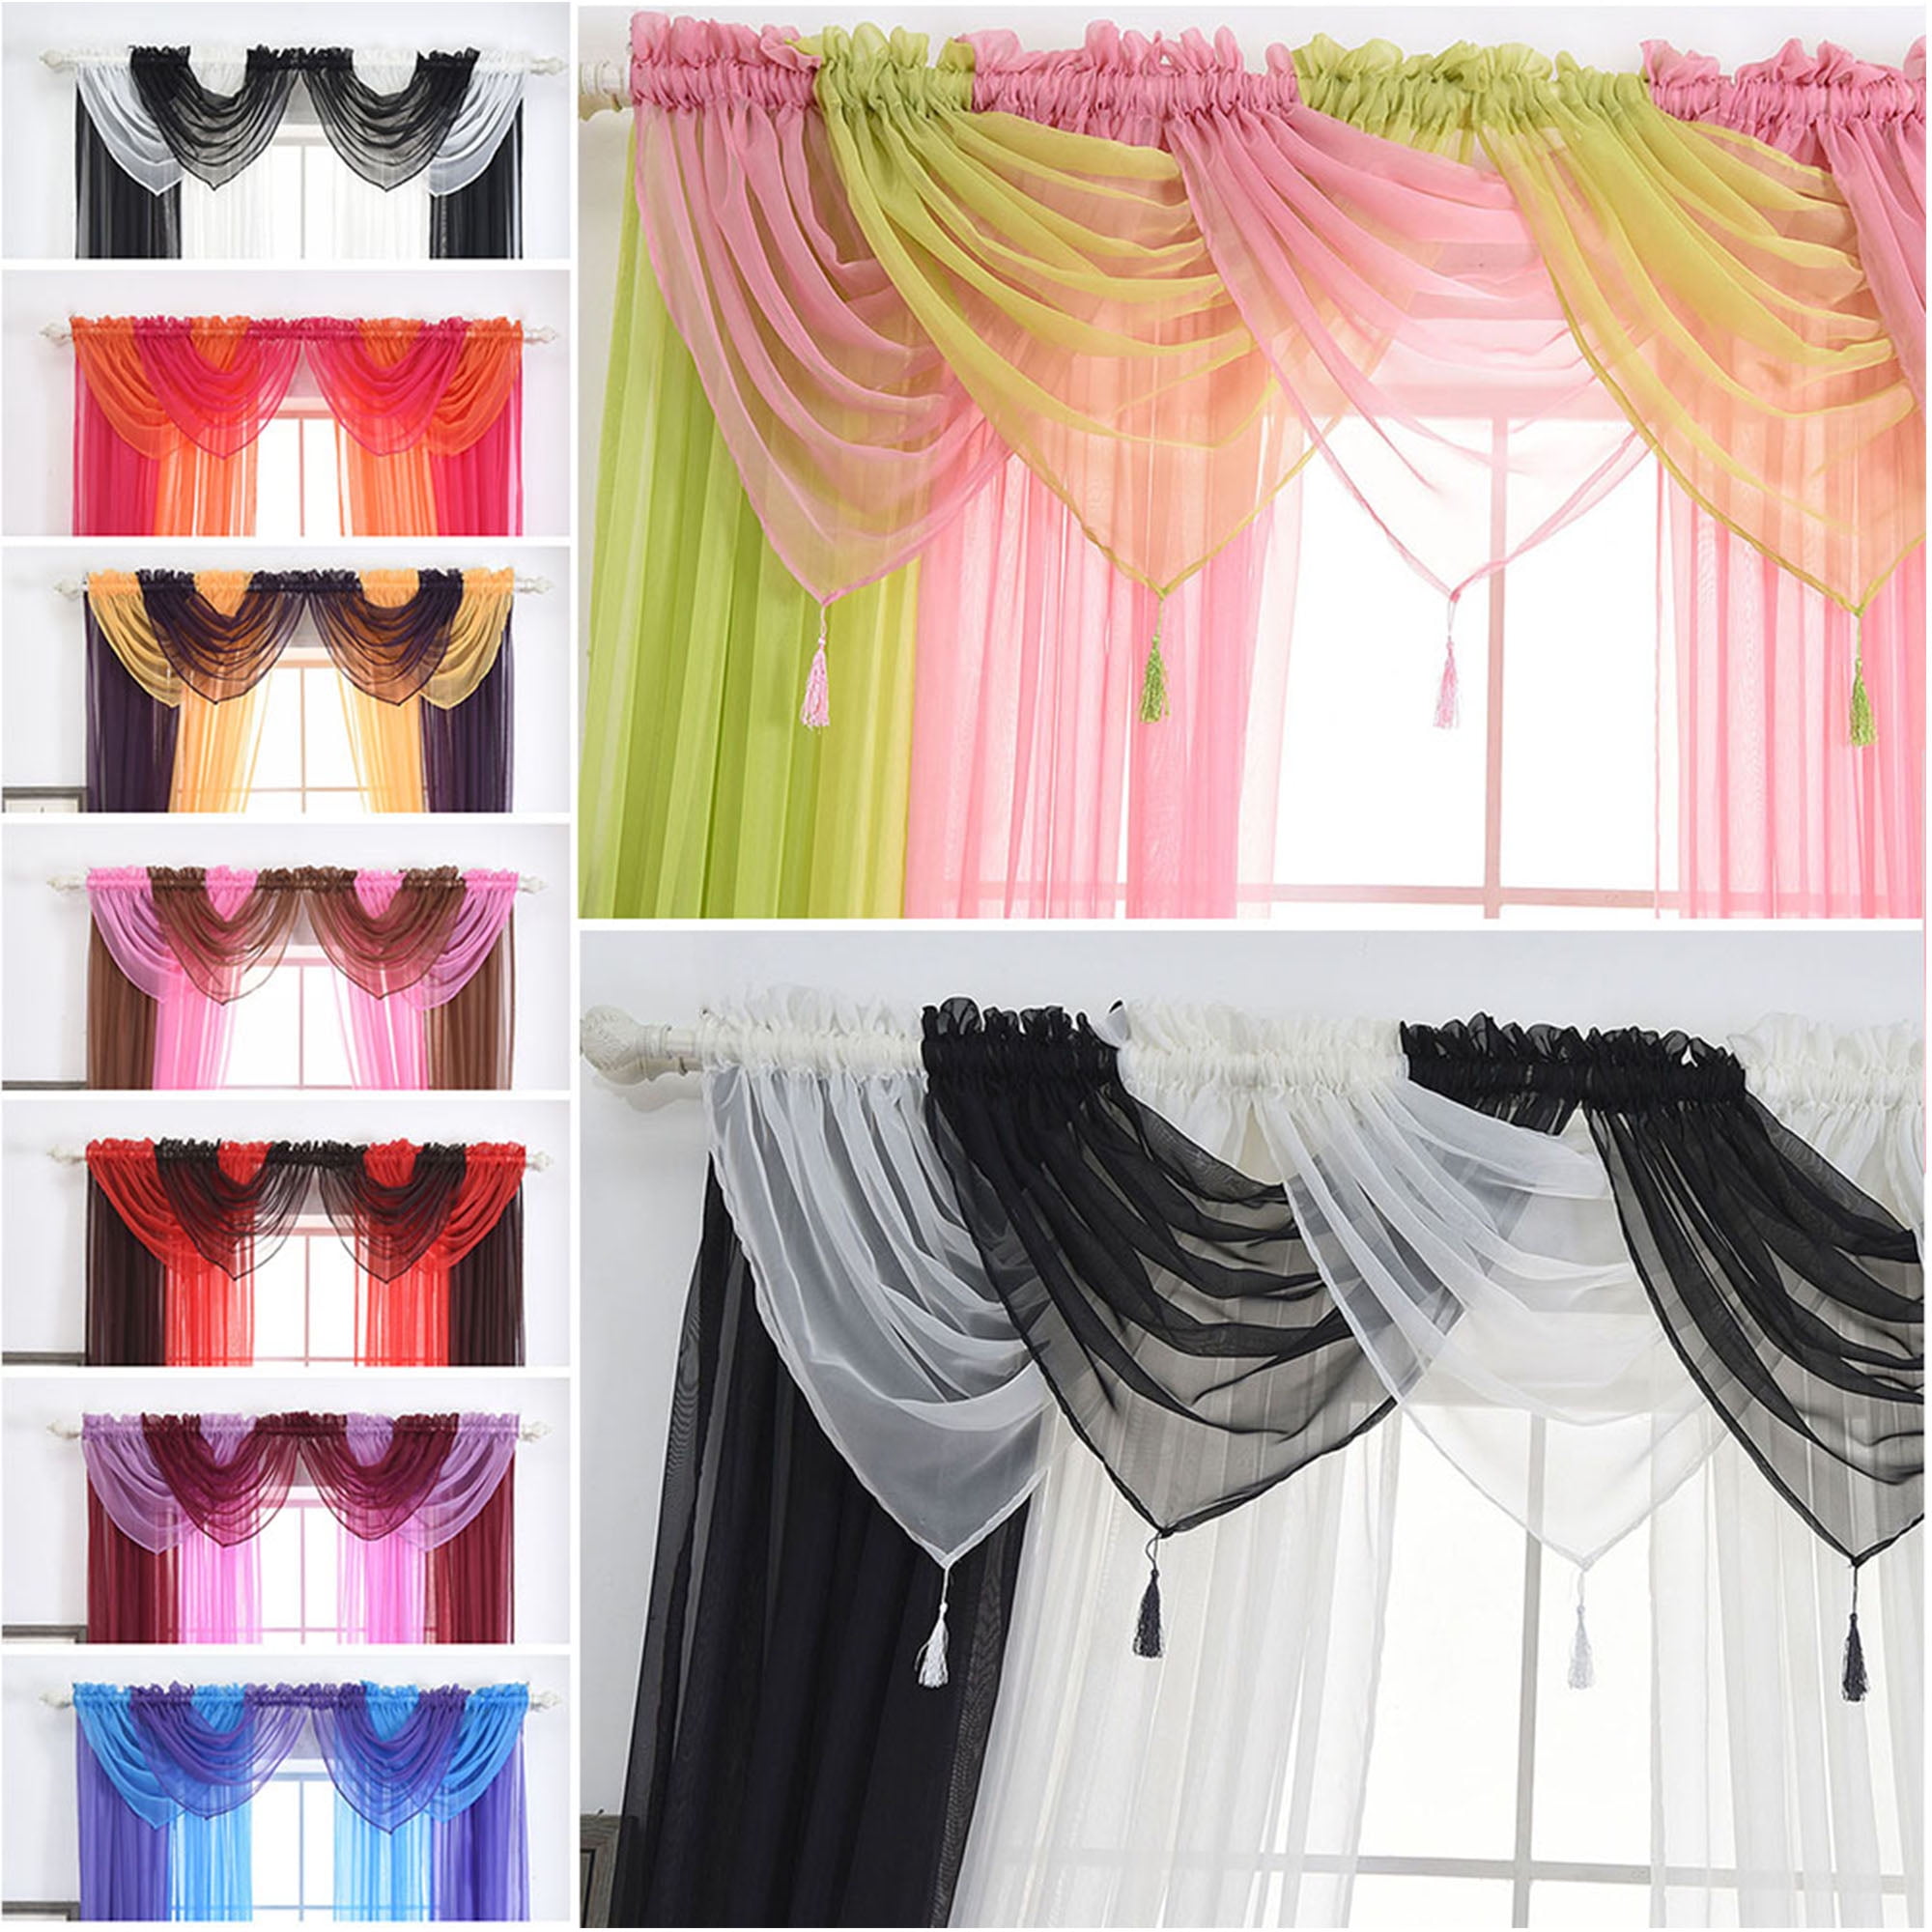 NEW LINEN LOOK Designer Curtains Swags & Tails Lined Choice If Colours In Pics 